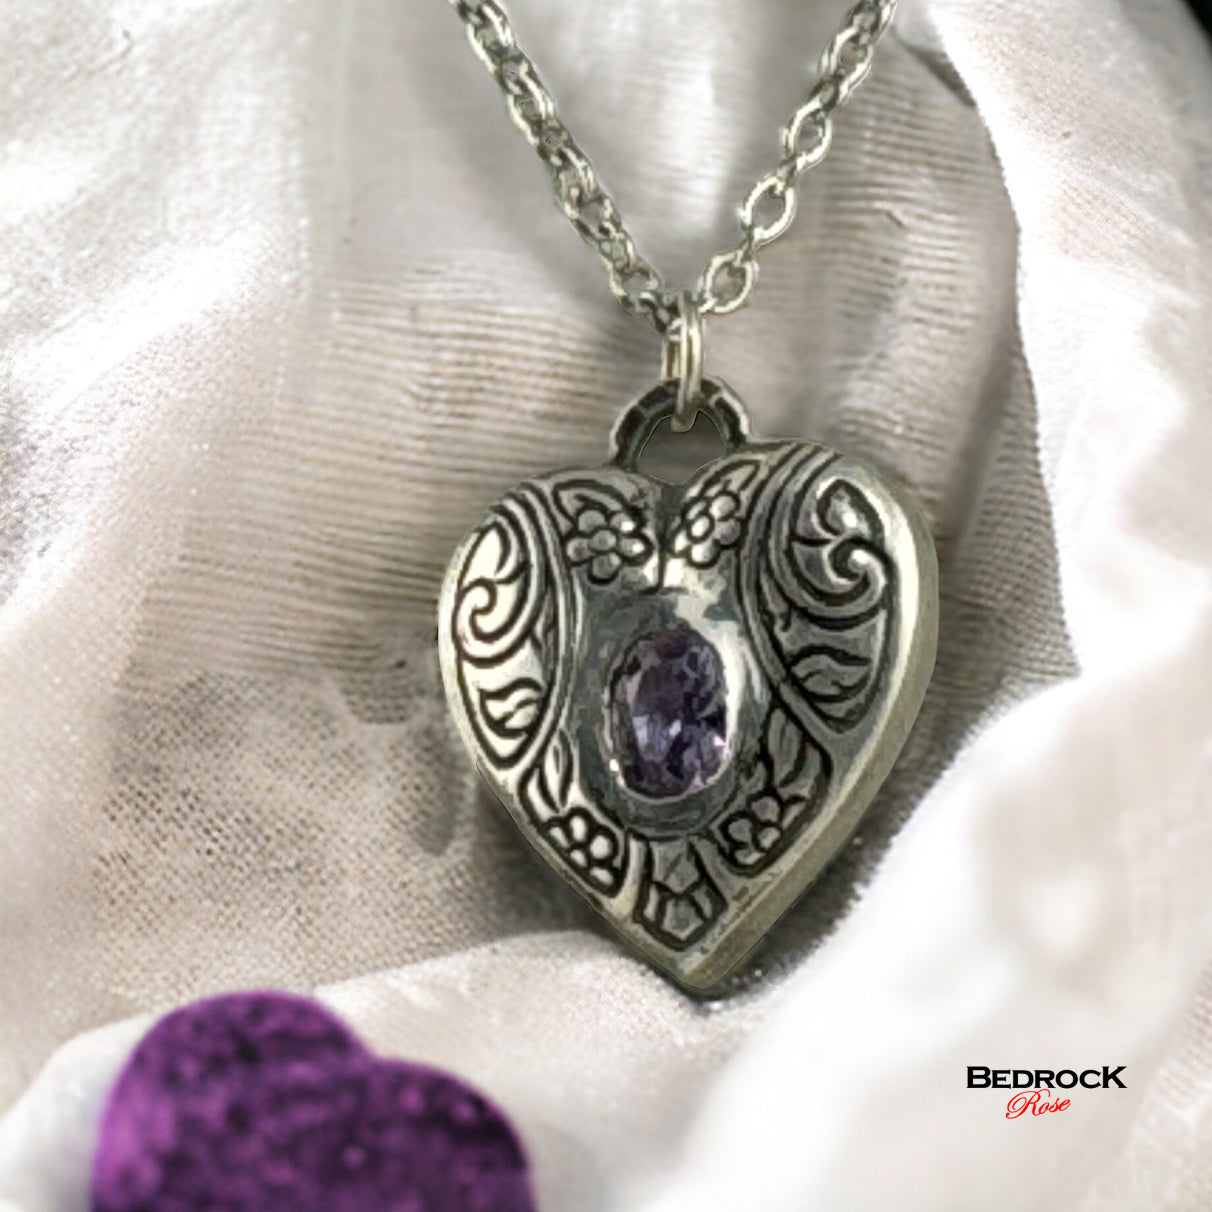 Silver Heart Pendant, Locket-style heart pendant, Silver heart Amethyst Necklace, Valentines Gift, Gift for Her, Heirloom quality heart pendant